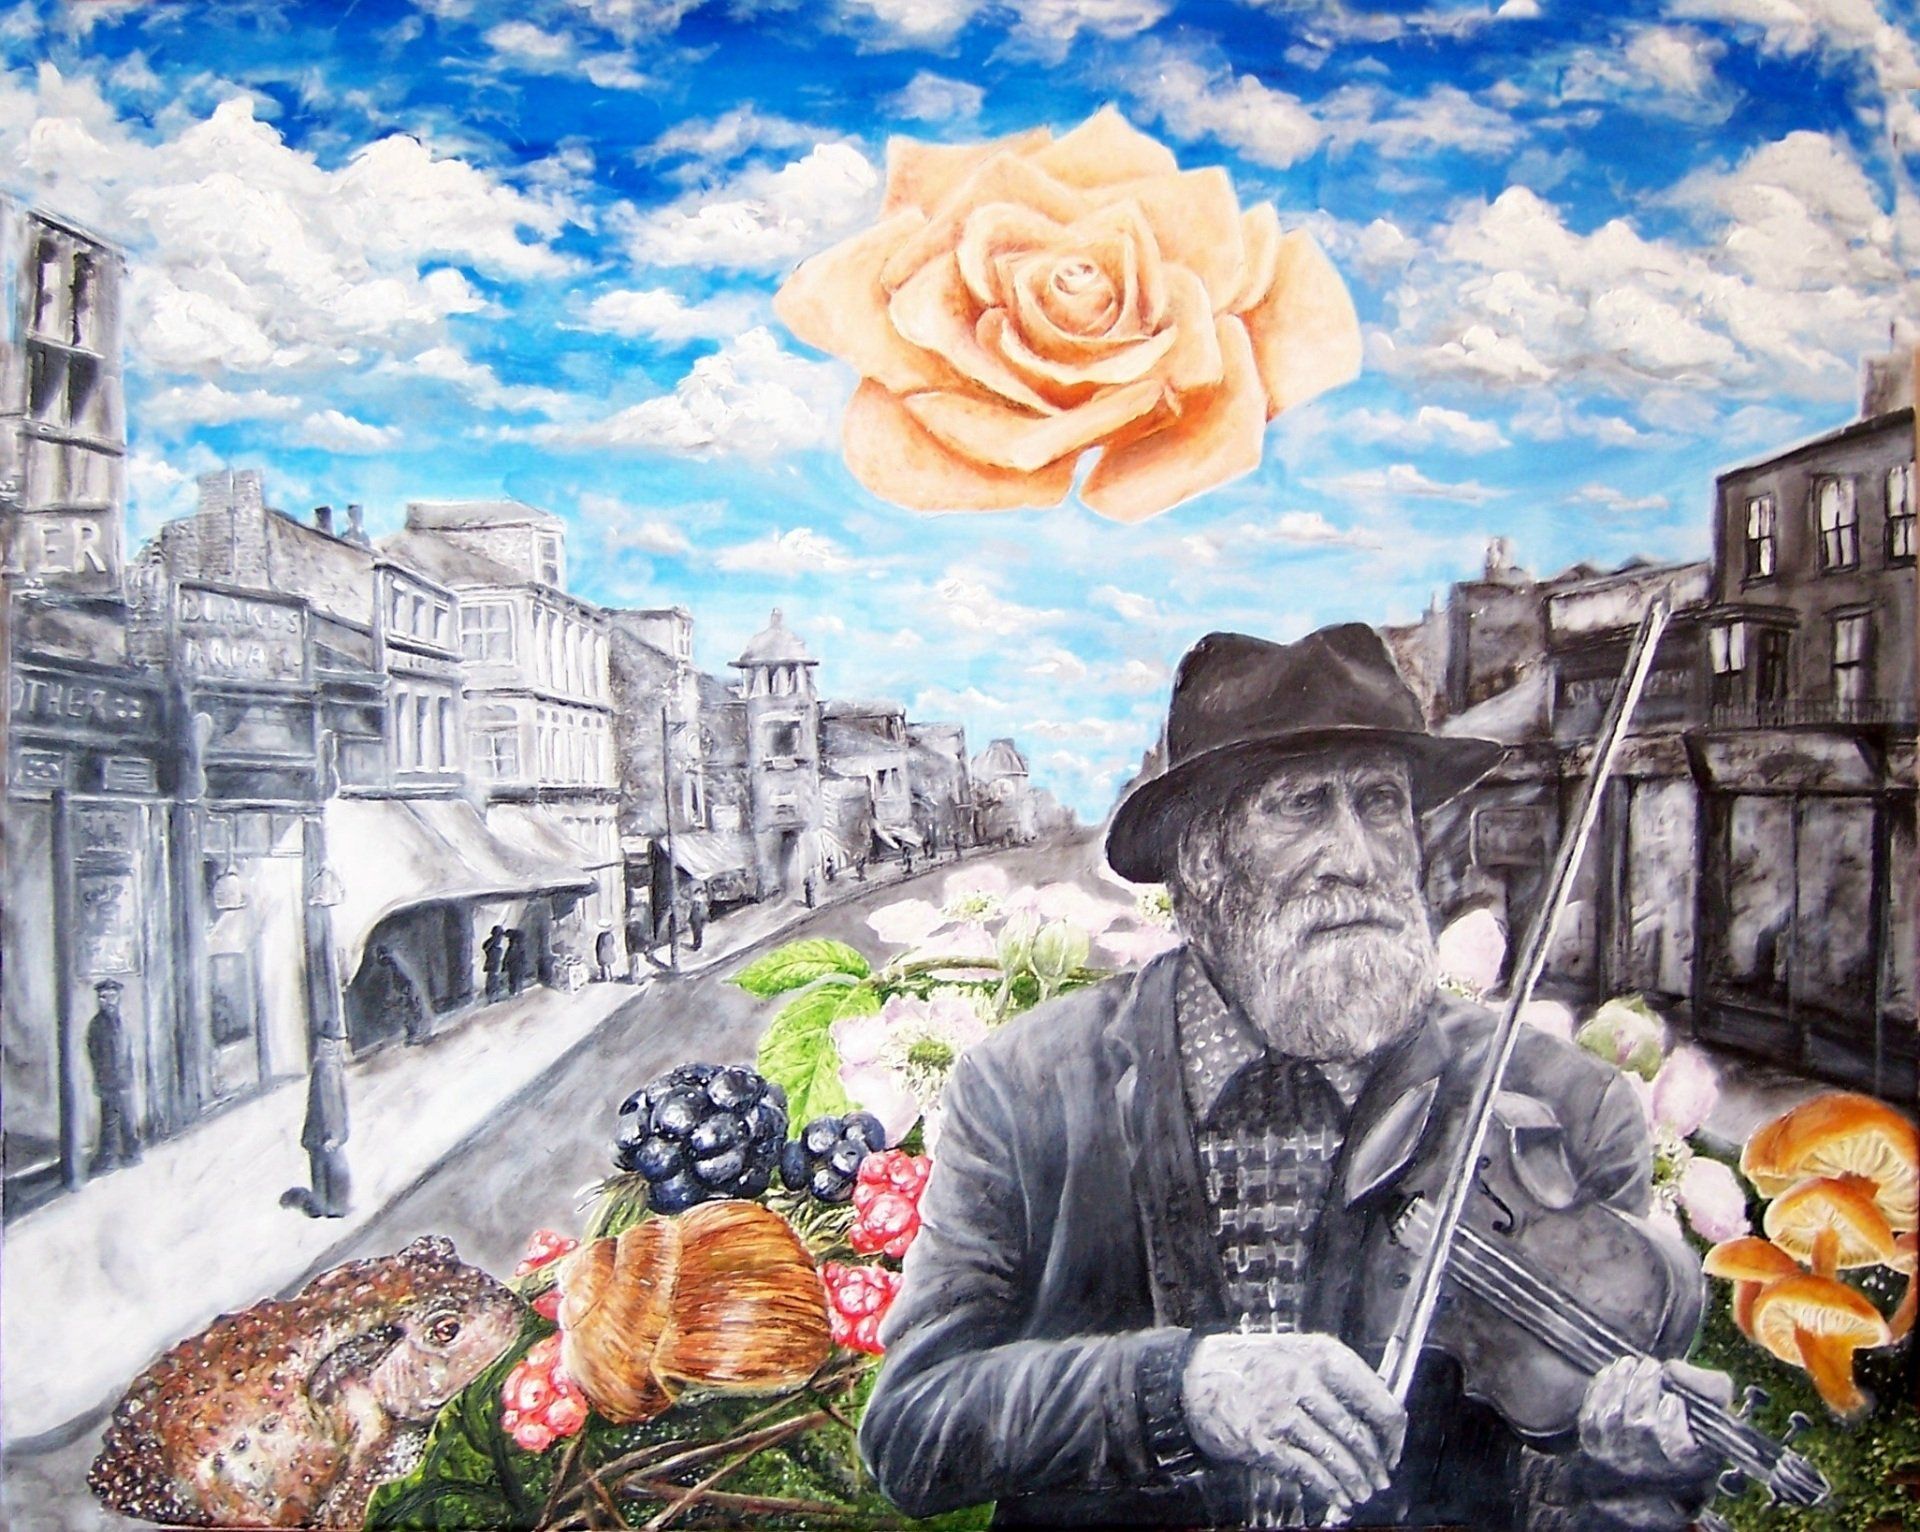 Mixed media, old man playing violin, blue sky, flowers, fruits, shells, toad stools